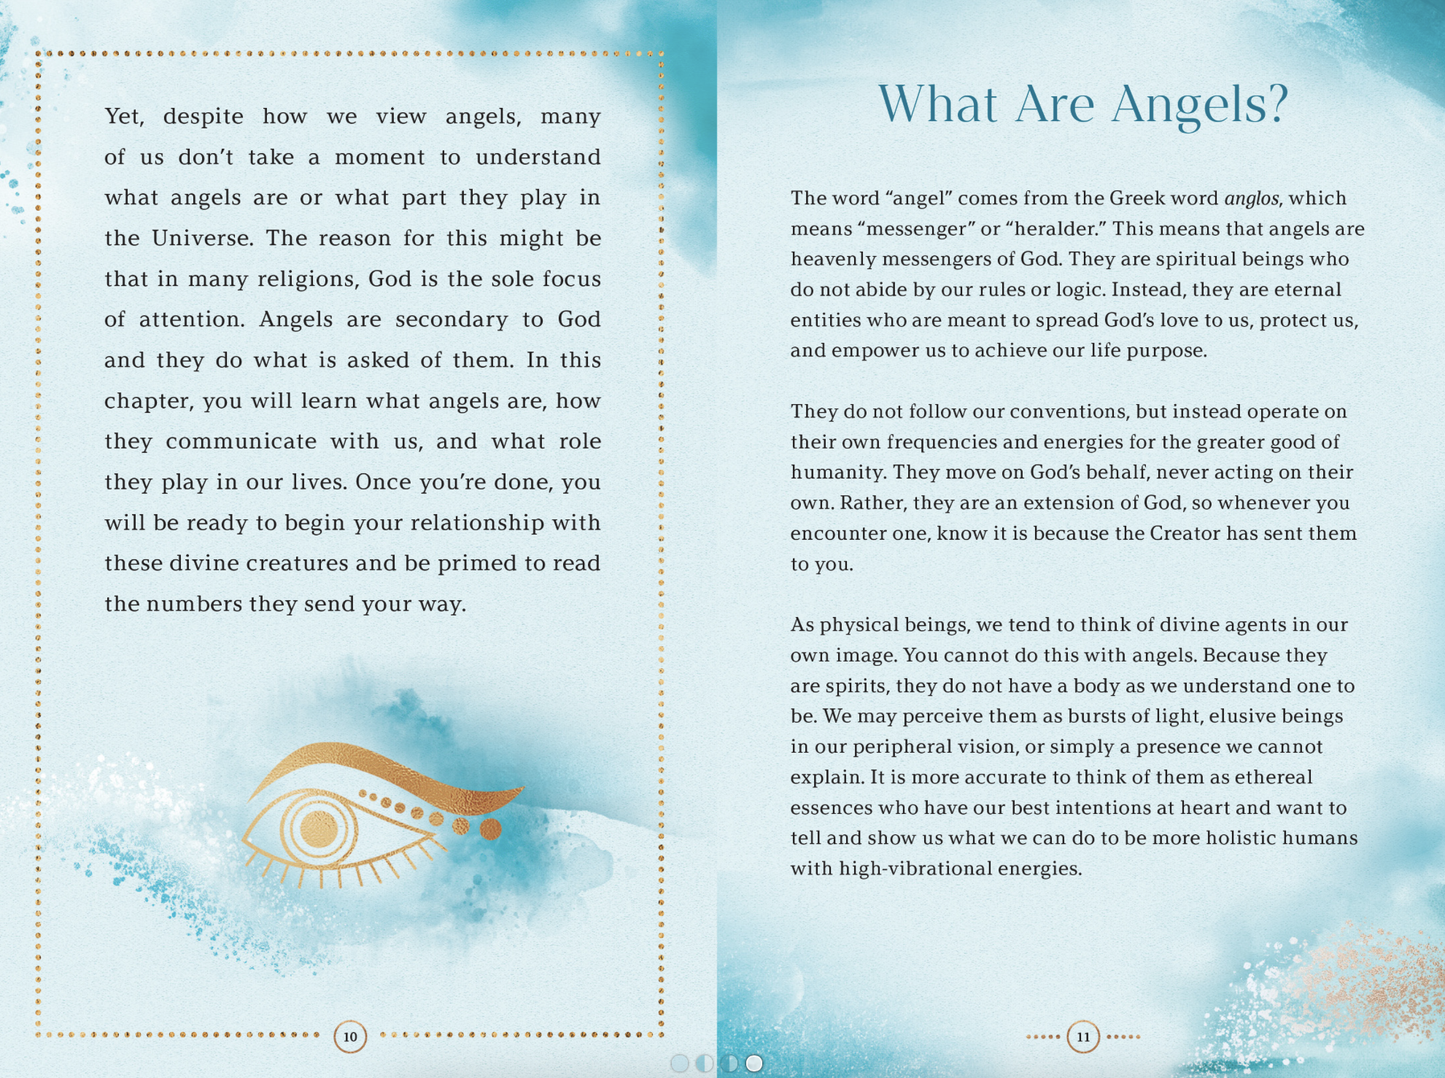 Angel Numbers: An Enchanting Meditation Book of Spirit Guides and Magic